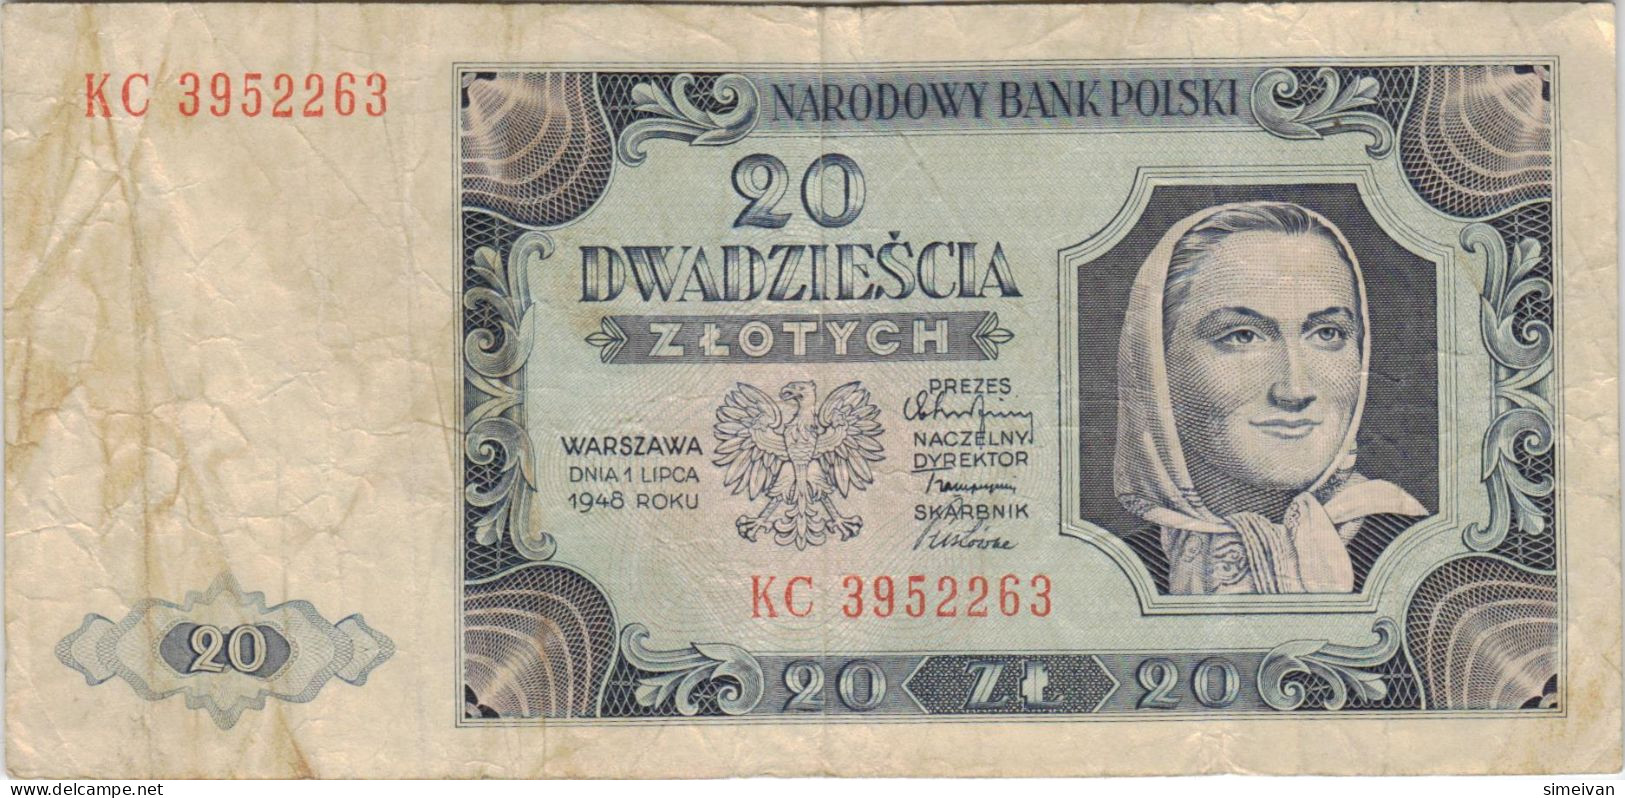 Poland 20 Zlotych 1948 P-137 Banknote Europe Currency Pologne Polen #5295 - Pologne